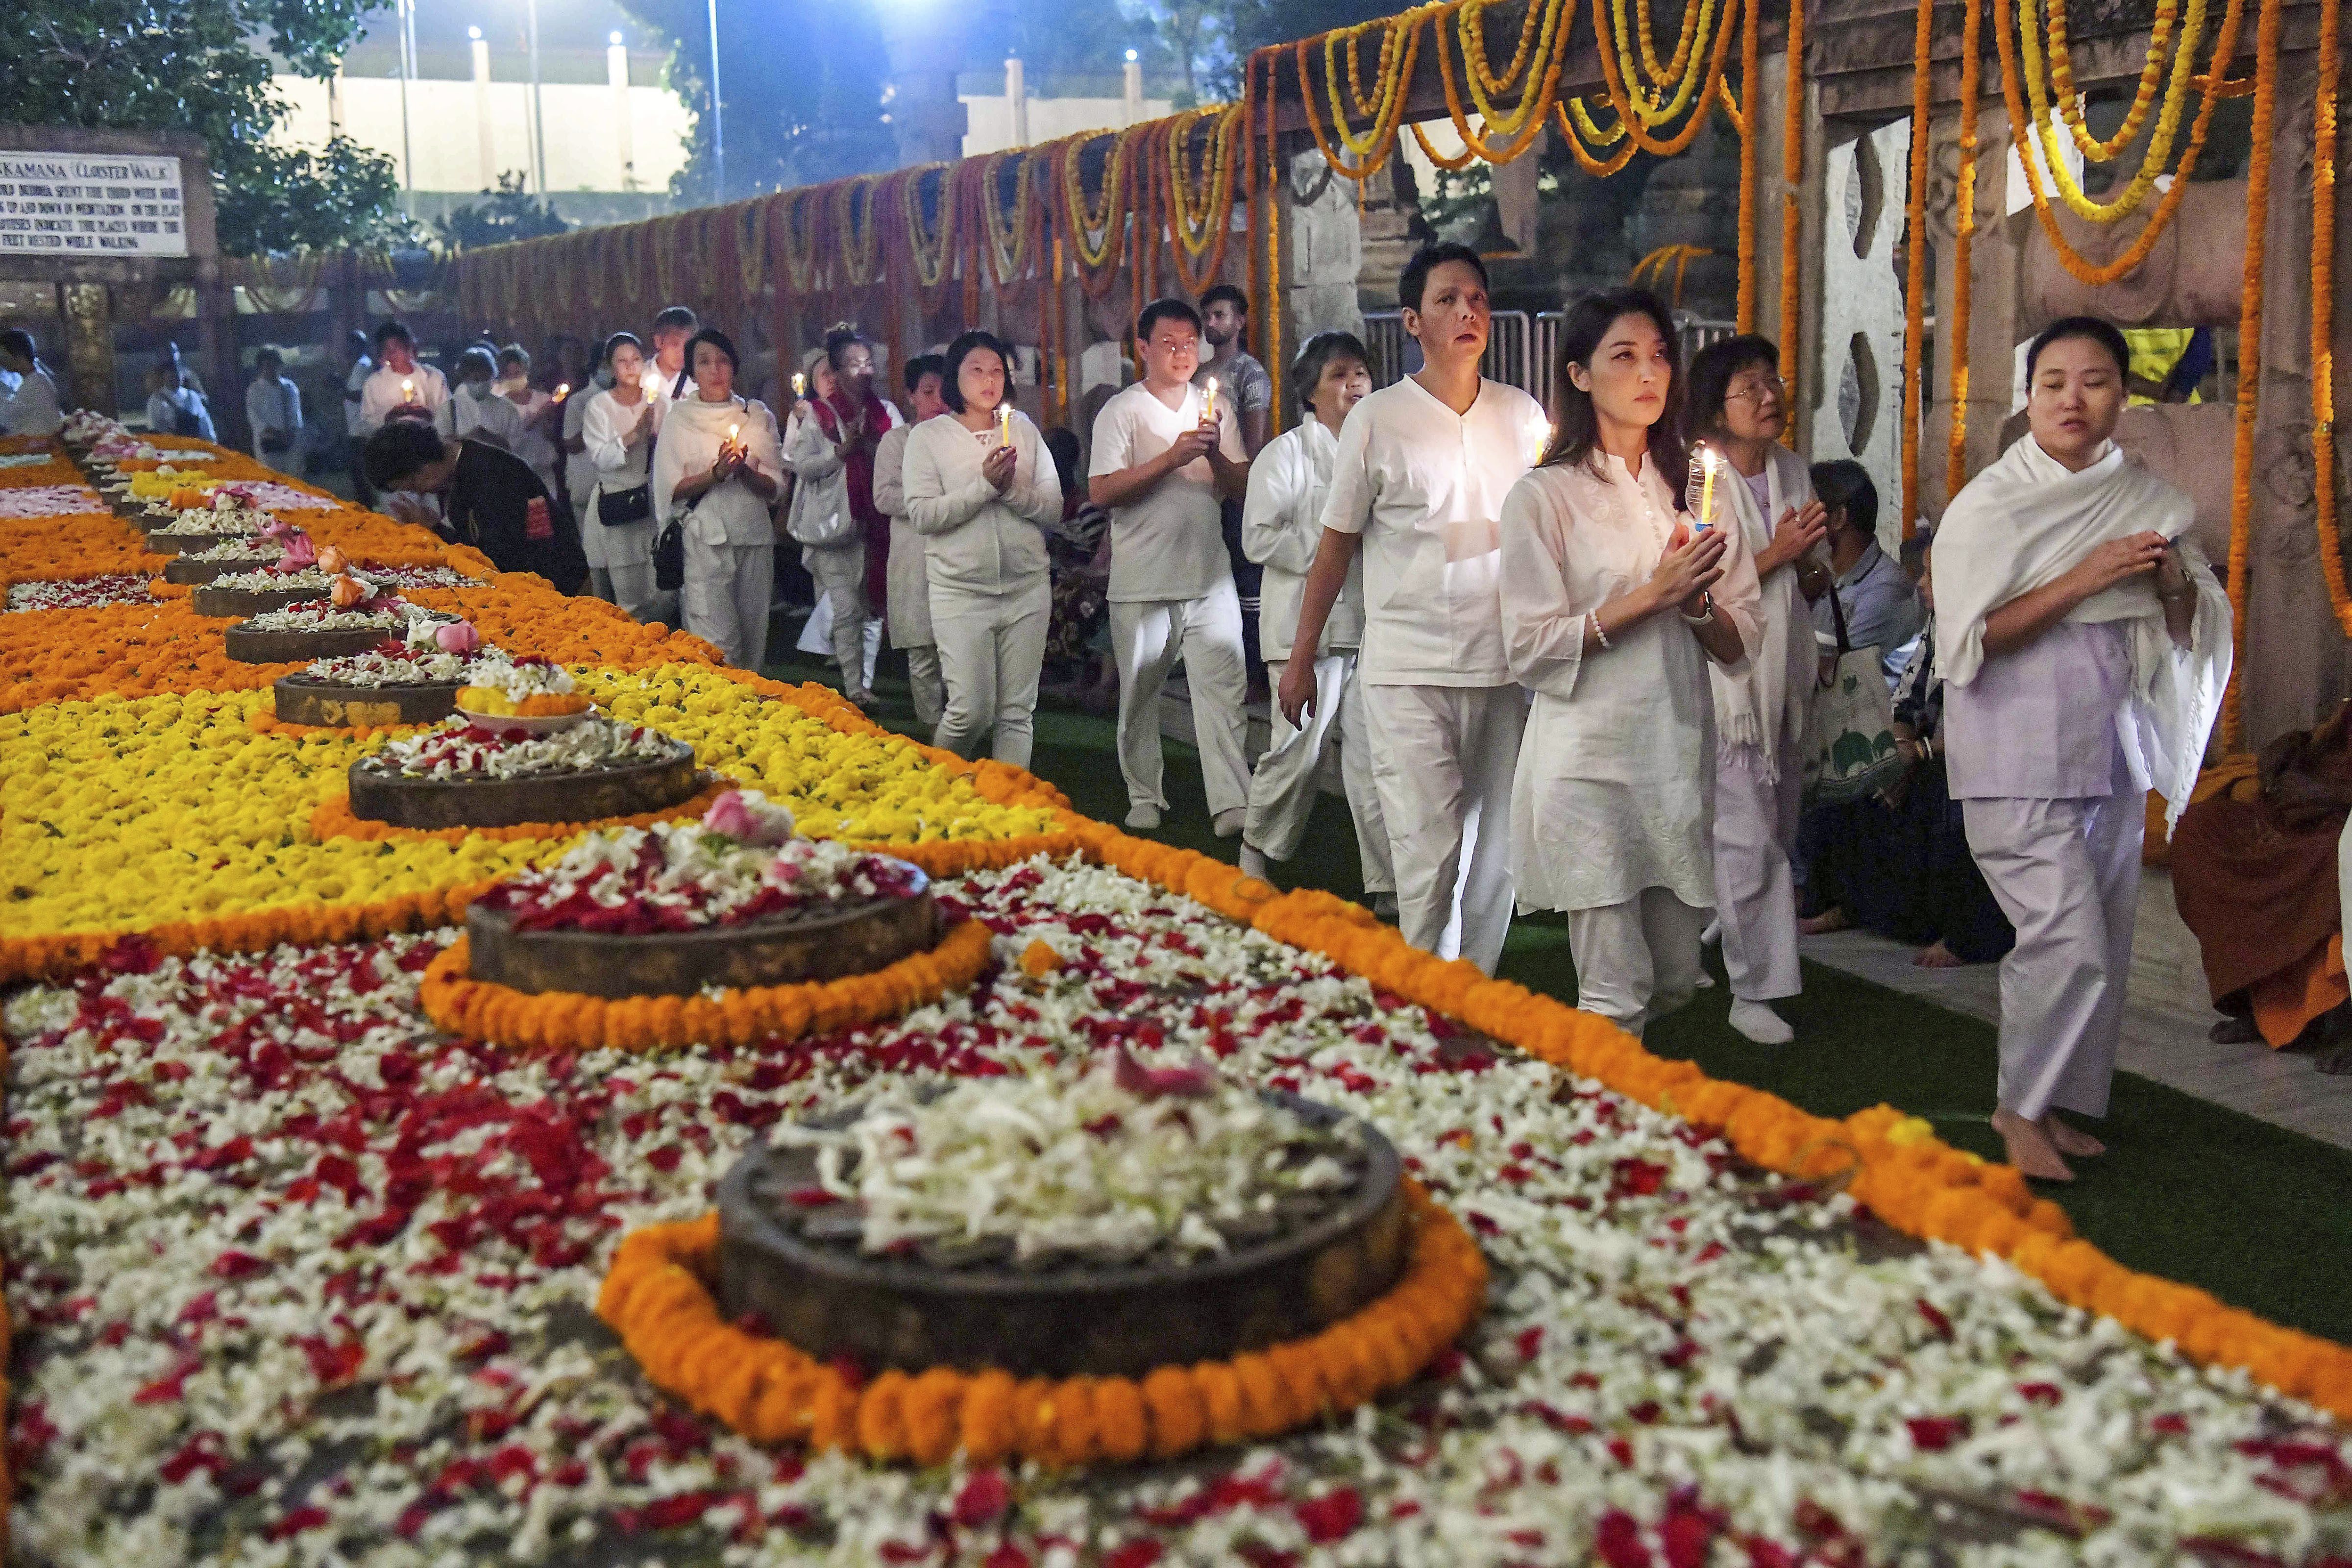 Thai devotees light up candles on the full moon day, at Mahabodhi Temple in Bodhgaya - PTI